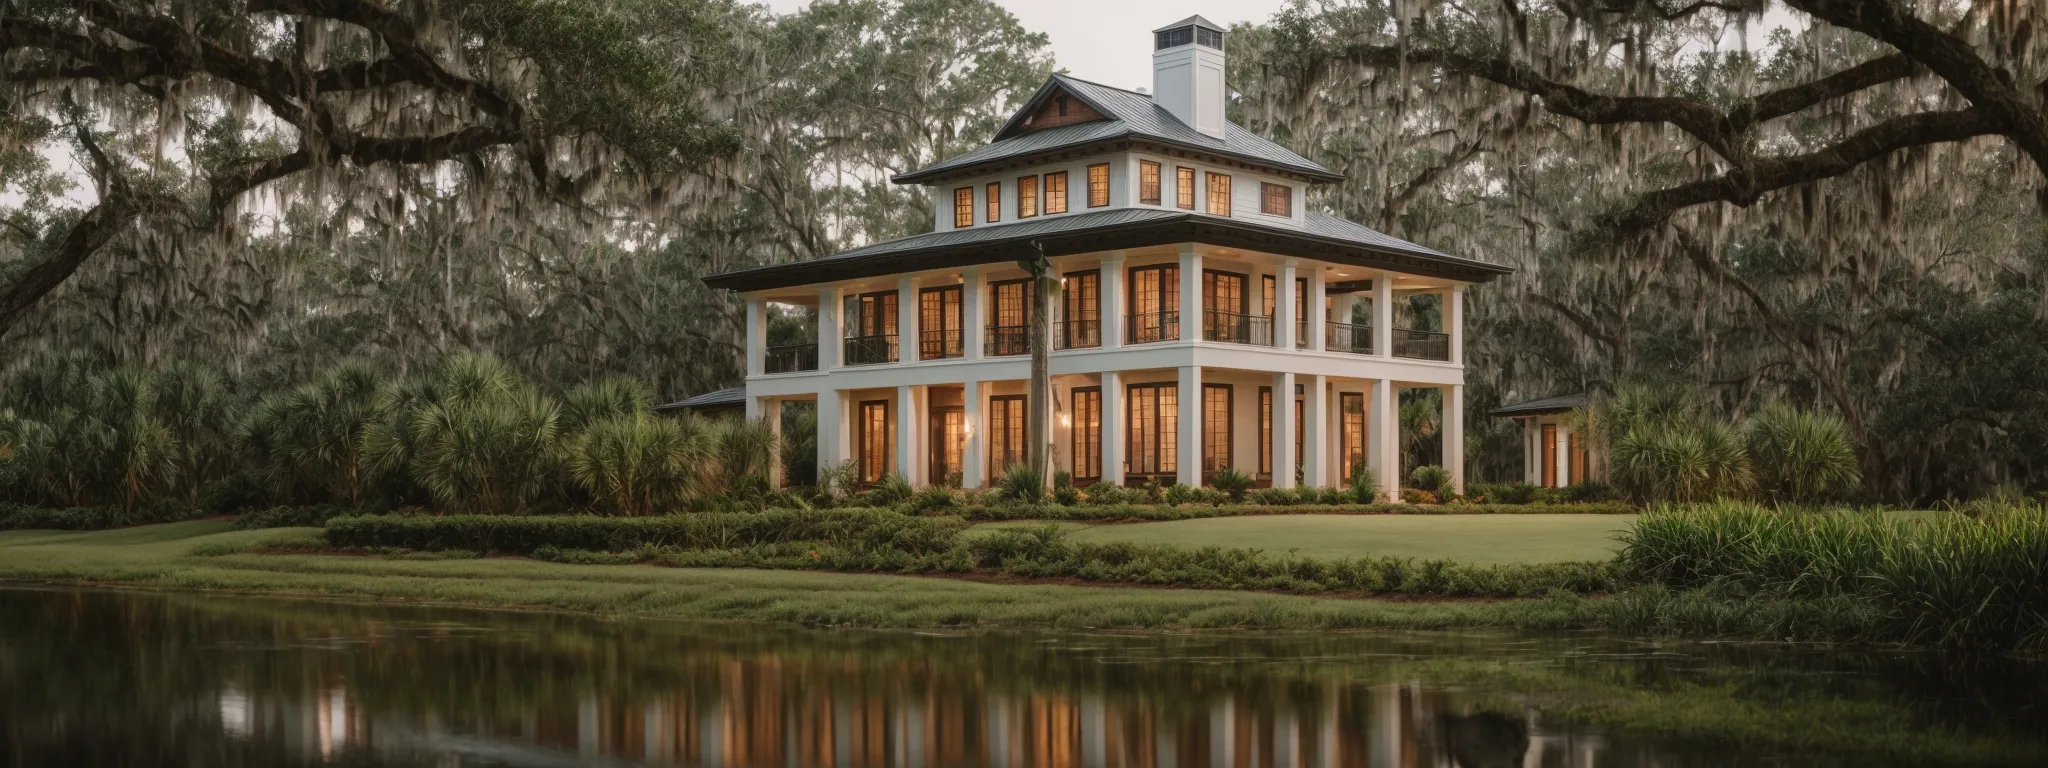 a serene johns island landscape with a newly constructed luxury home amid lush greenery, reflecting the unique, custom elegance promised by oak angel builders.